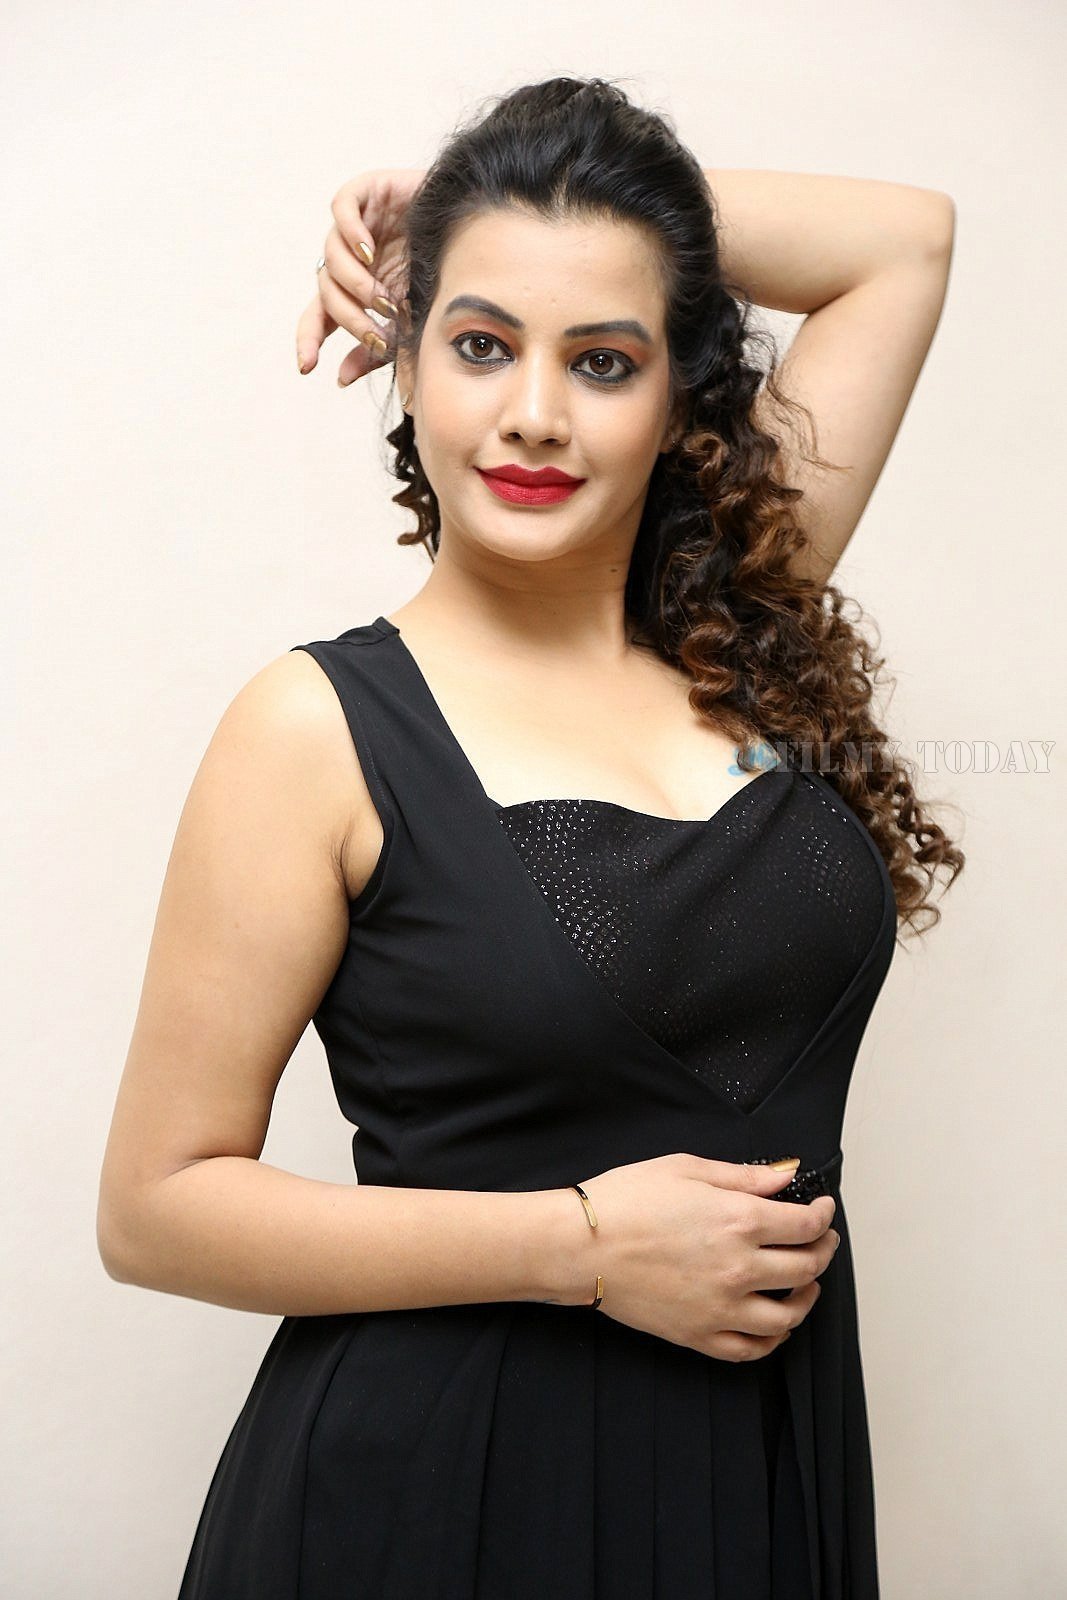 Actress Deeksha Panth Hot Stills at Operation 2019 First Look Launch | Picture 1561744